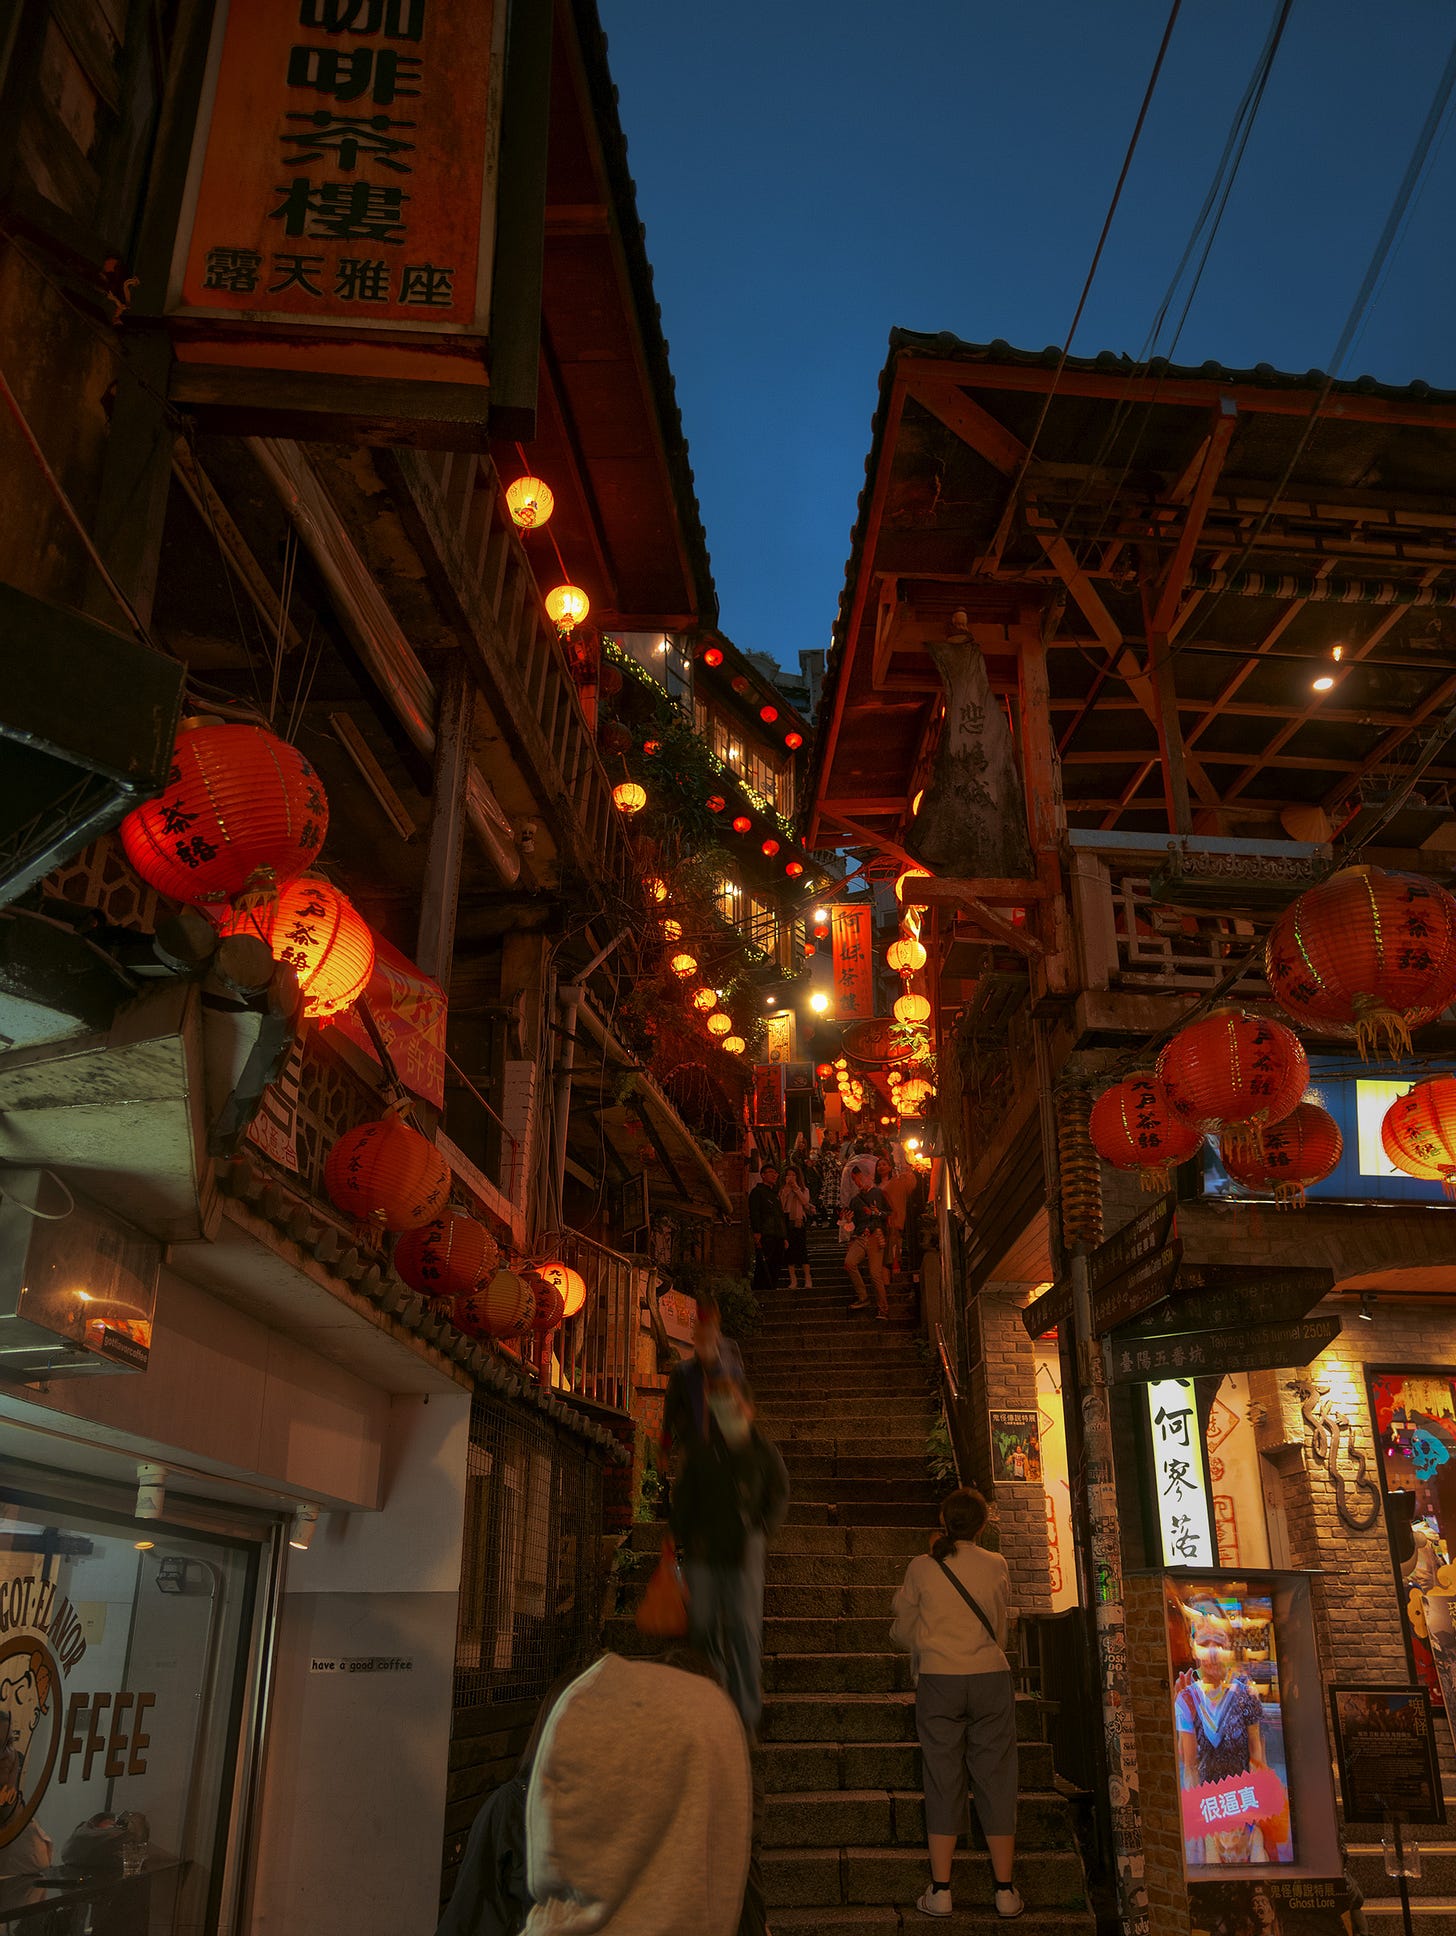 A steep, narrow staircase alley near Jiufen’s Amei Teahouse and Shengping Theater, lit with the town’s iconic red lanterns